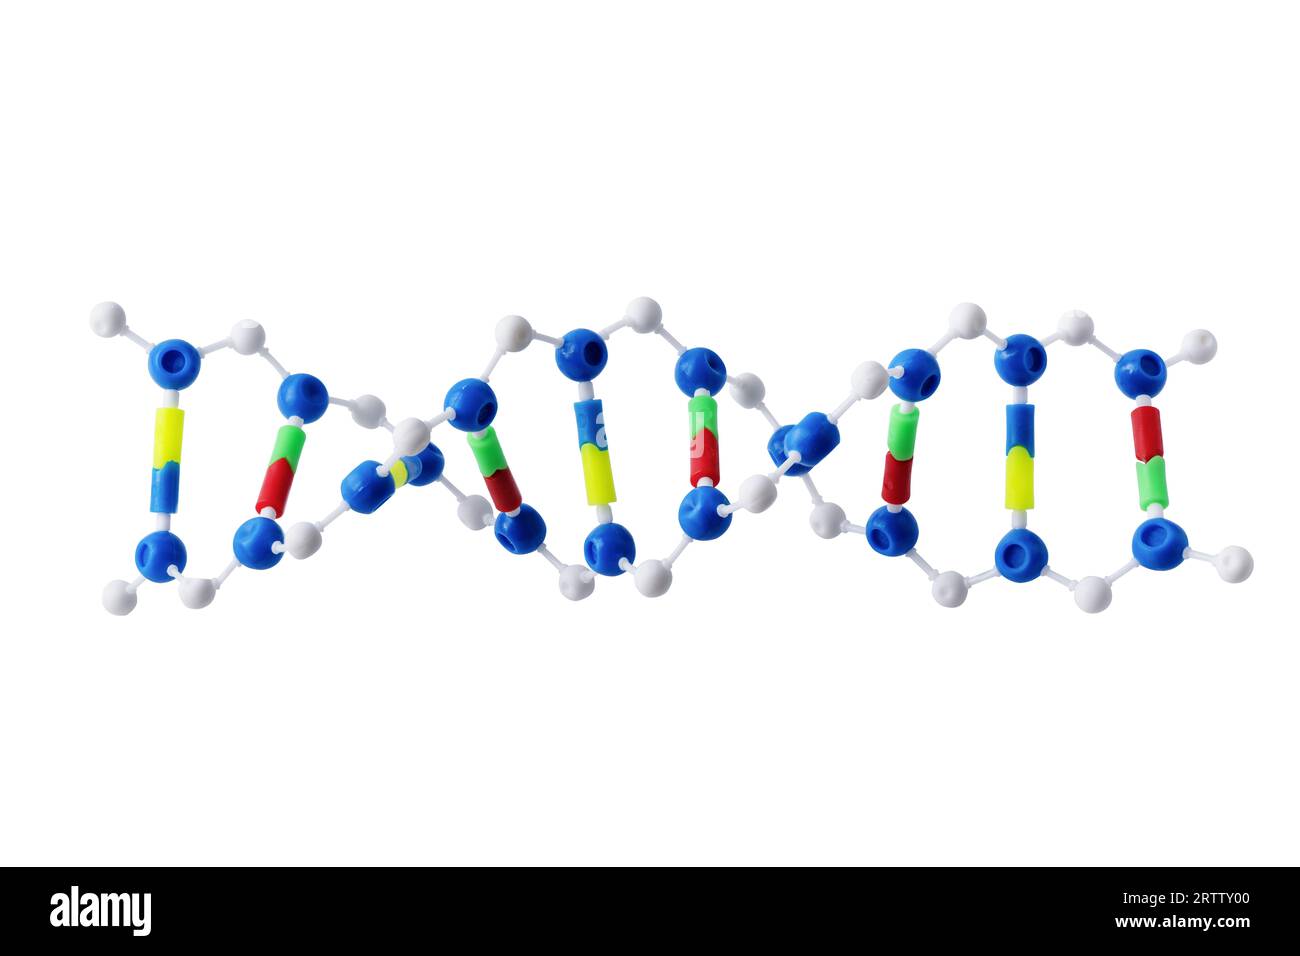 DNA model isolated on white background. DNA souvenir. Stock Photo